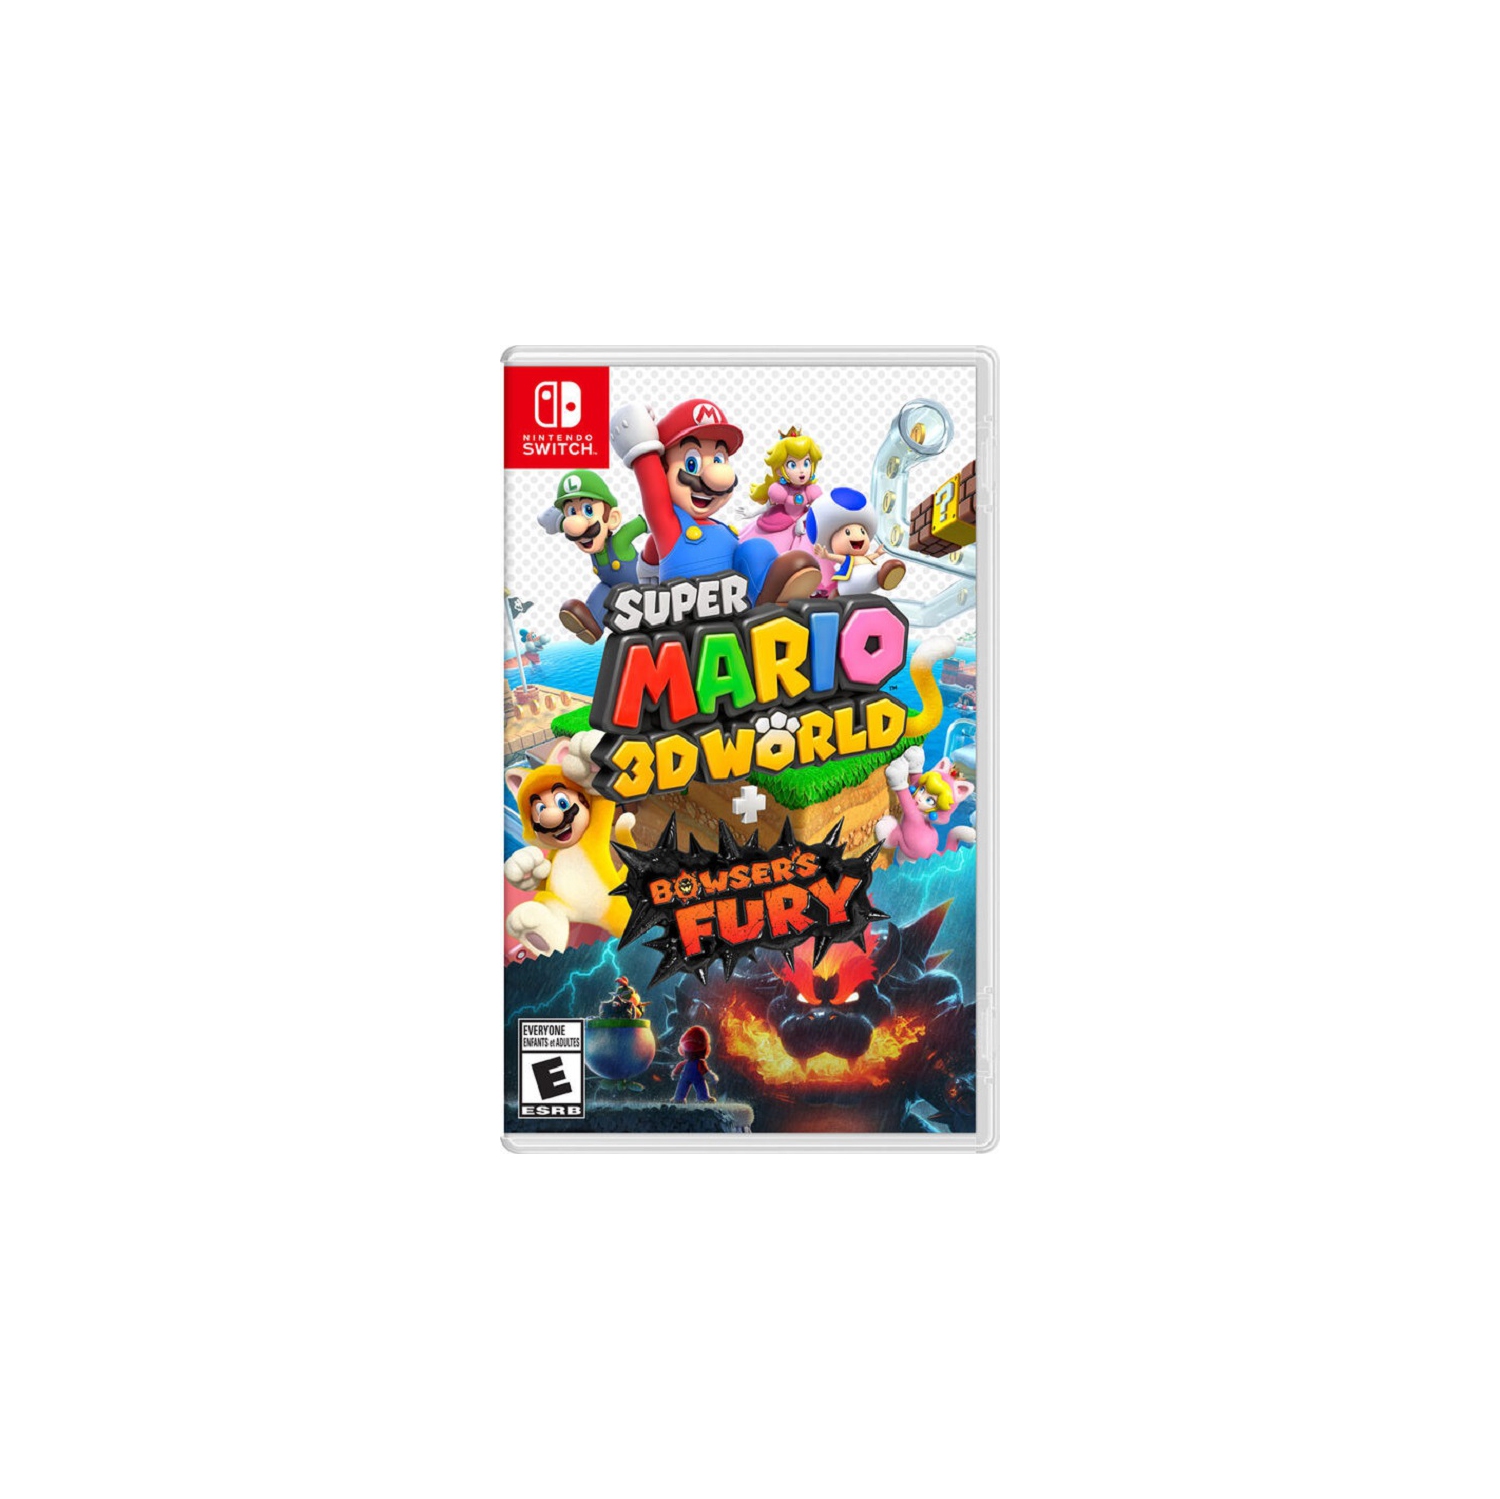 Nintendo Super Mario 3D World, Bowser's Fury for Ages 5 - 8 years